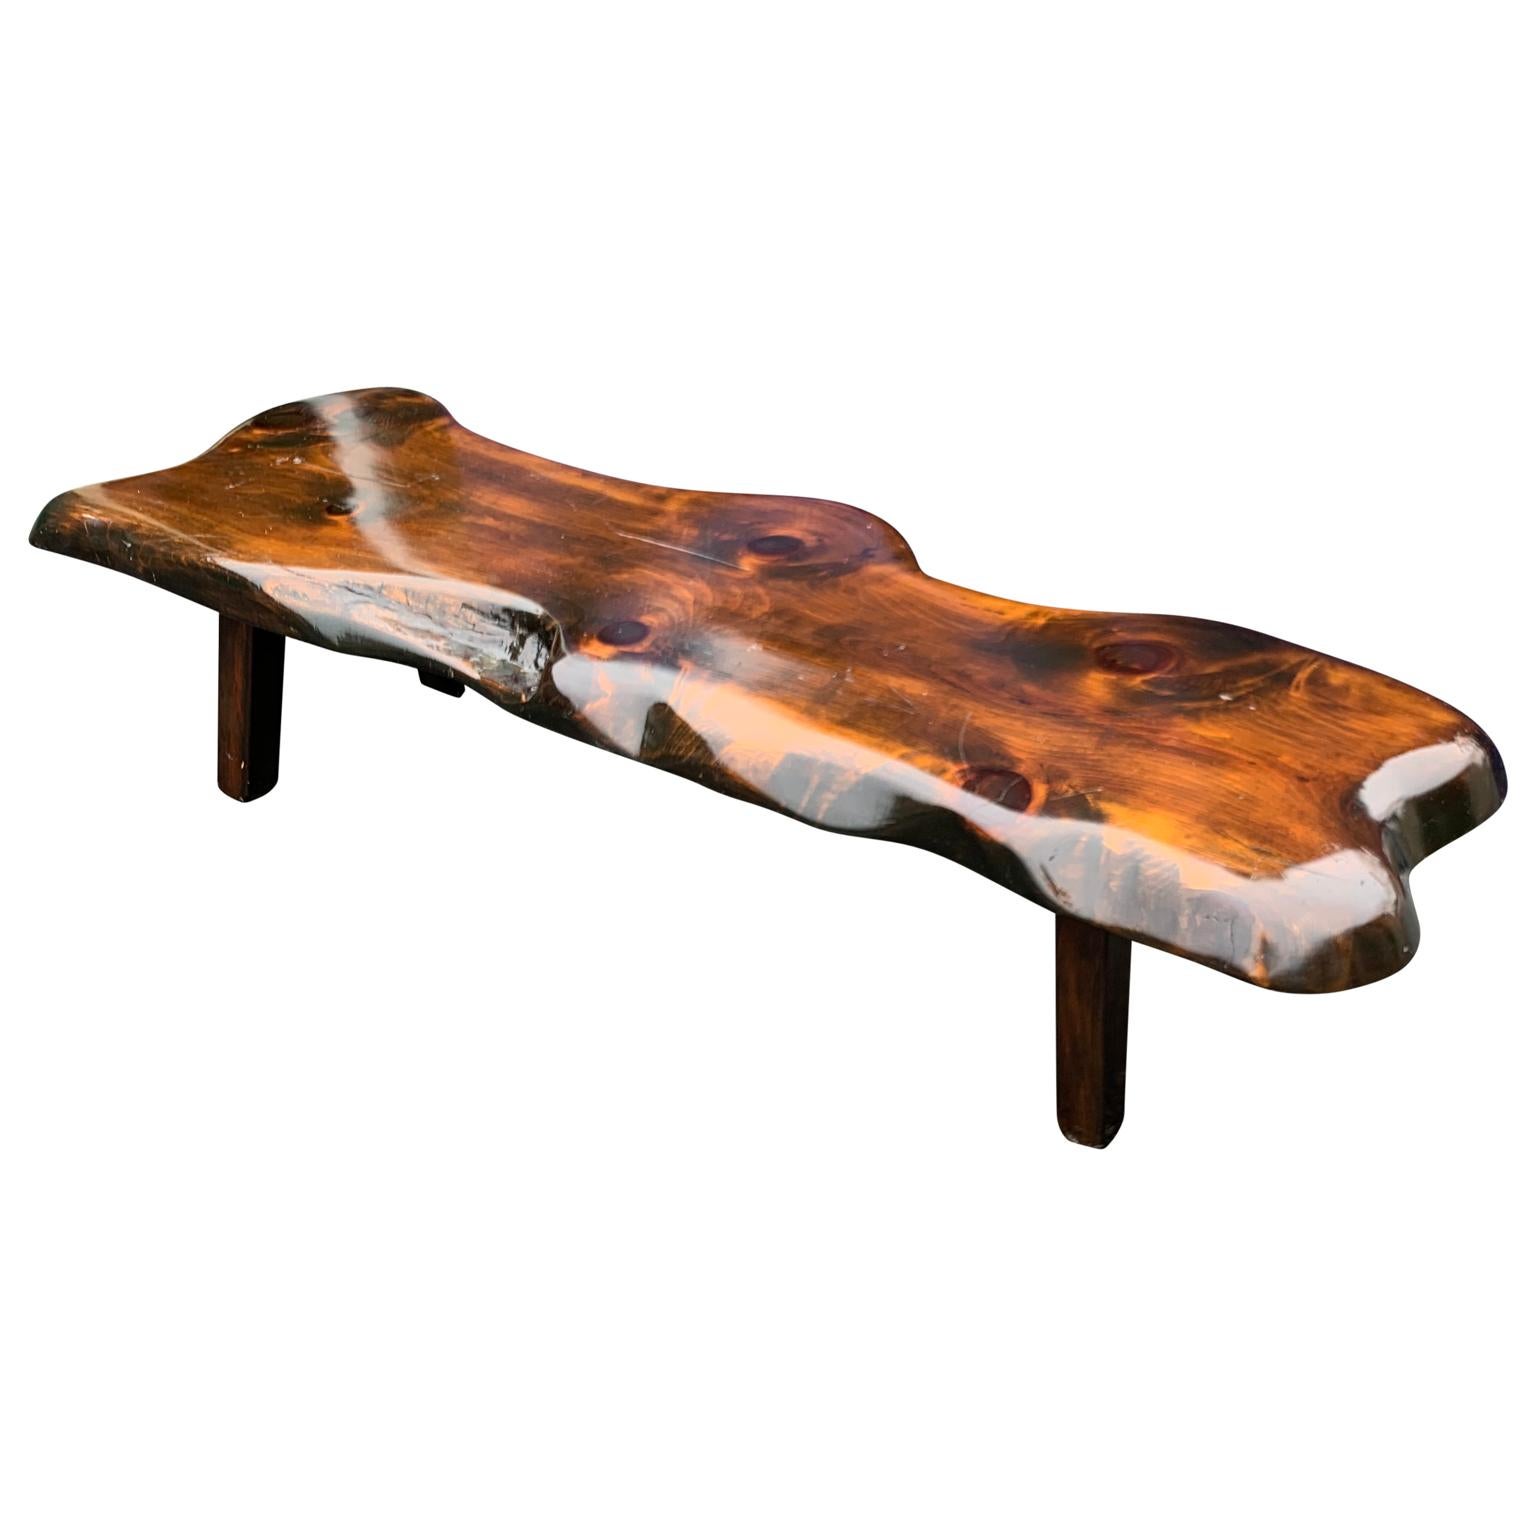 Large wooden folk art bench or cocktail table.